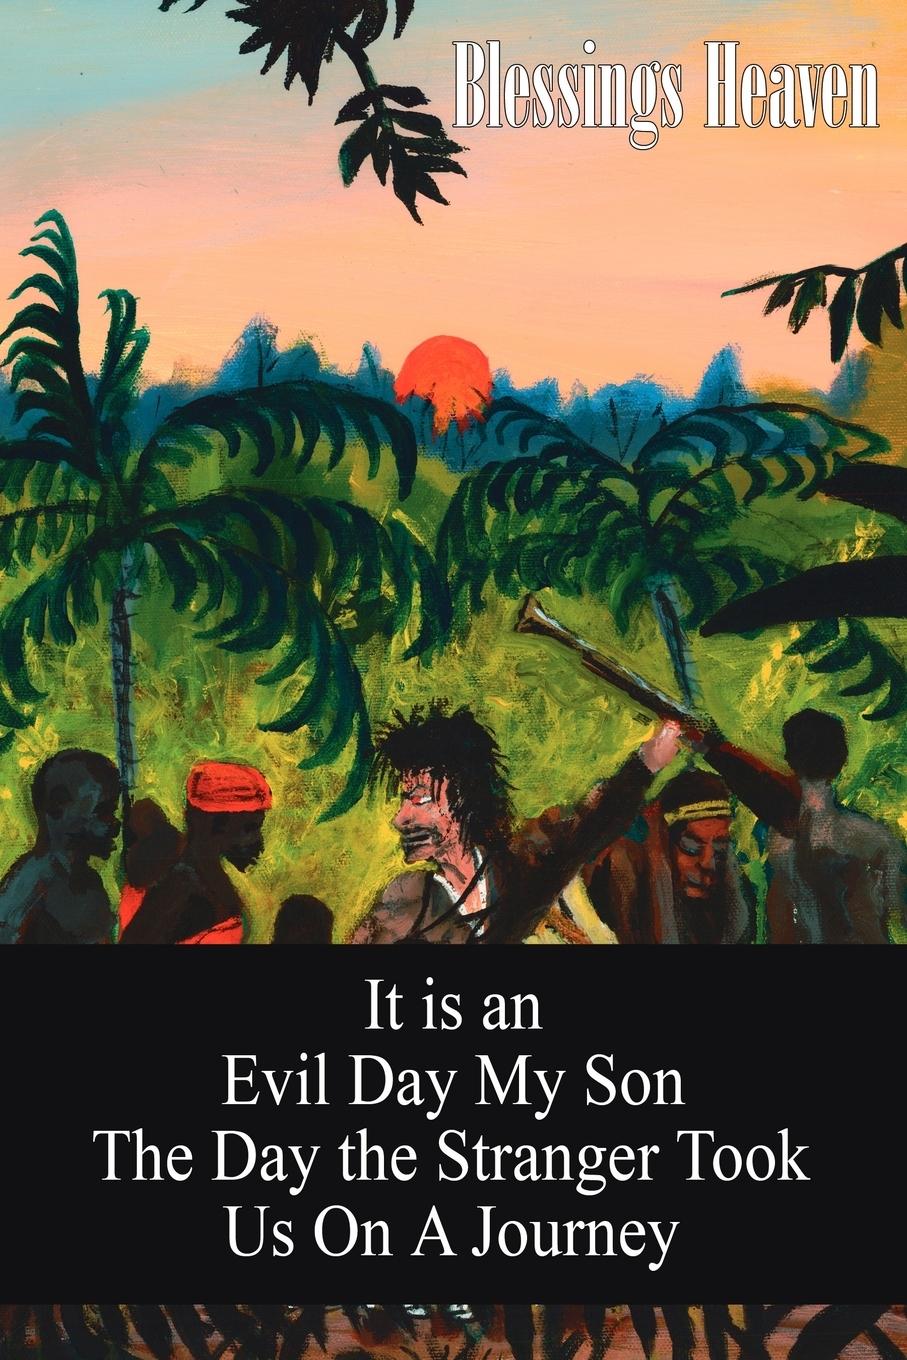 It is an Evil Day My Son - Heaven, Blessings